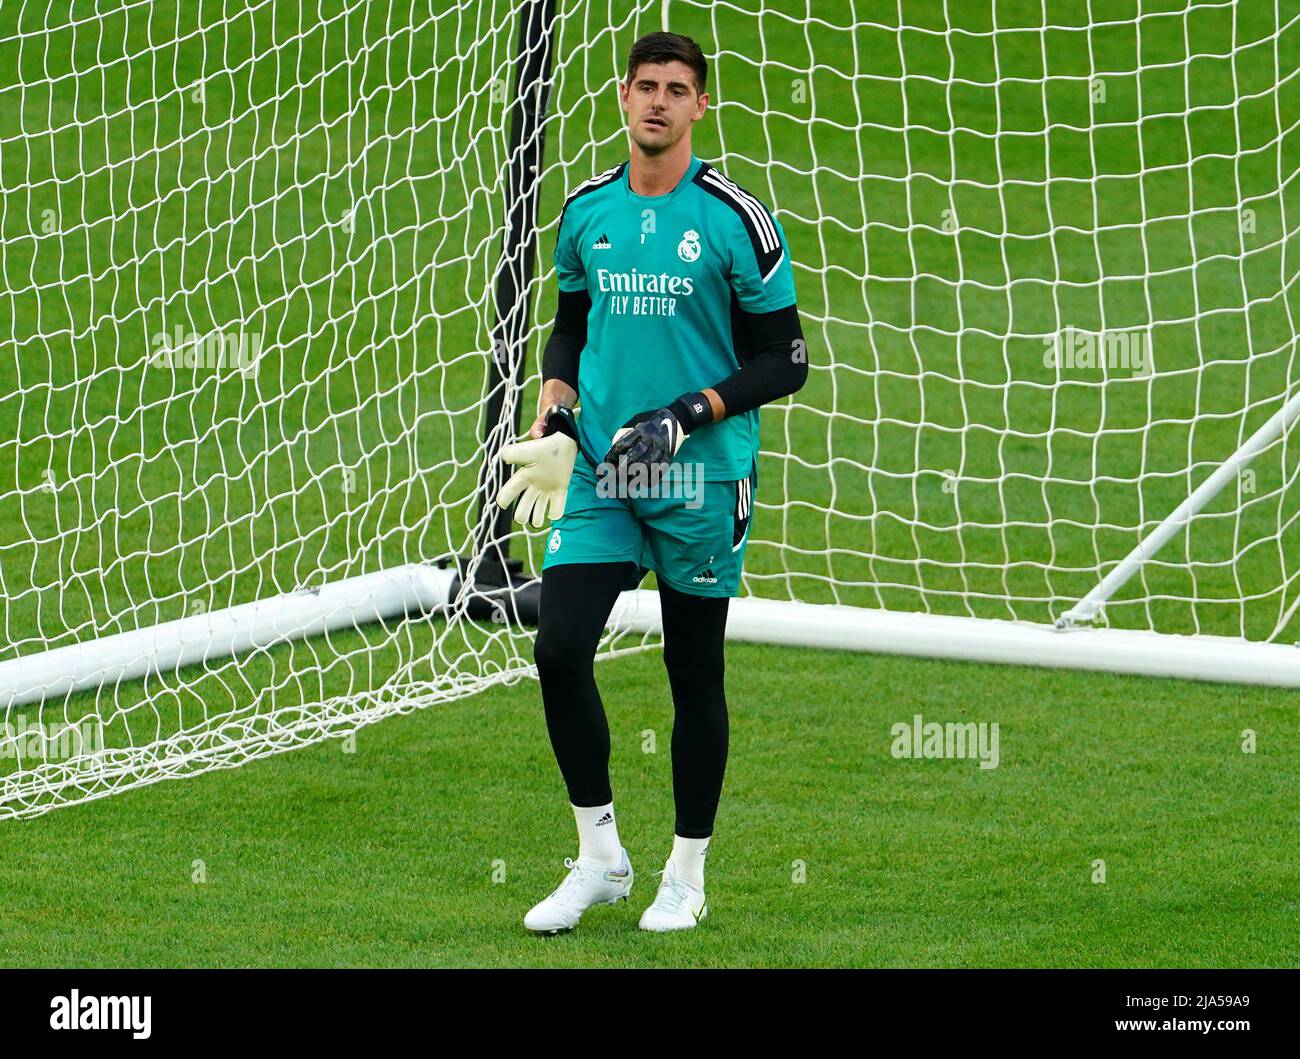 Real Madrid goalkeeper Thibaut Courtois during a training session at Stade  de France ahead of the UEFA Champions League Final in Paris on Saturday.  Picture date: Friday May 27, 2022 Stock Photo - Alamy